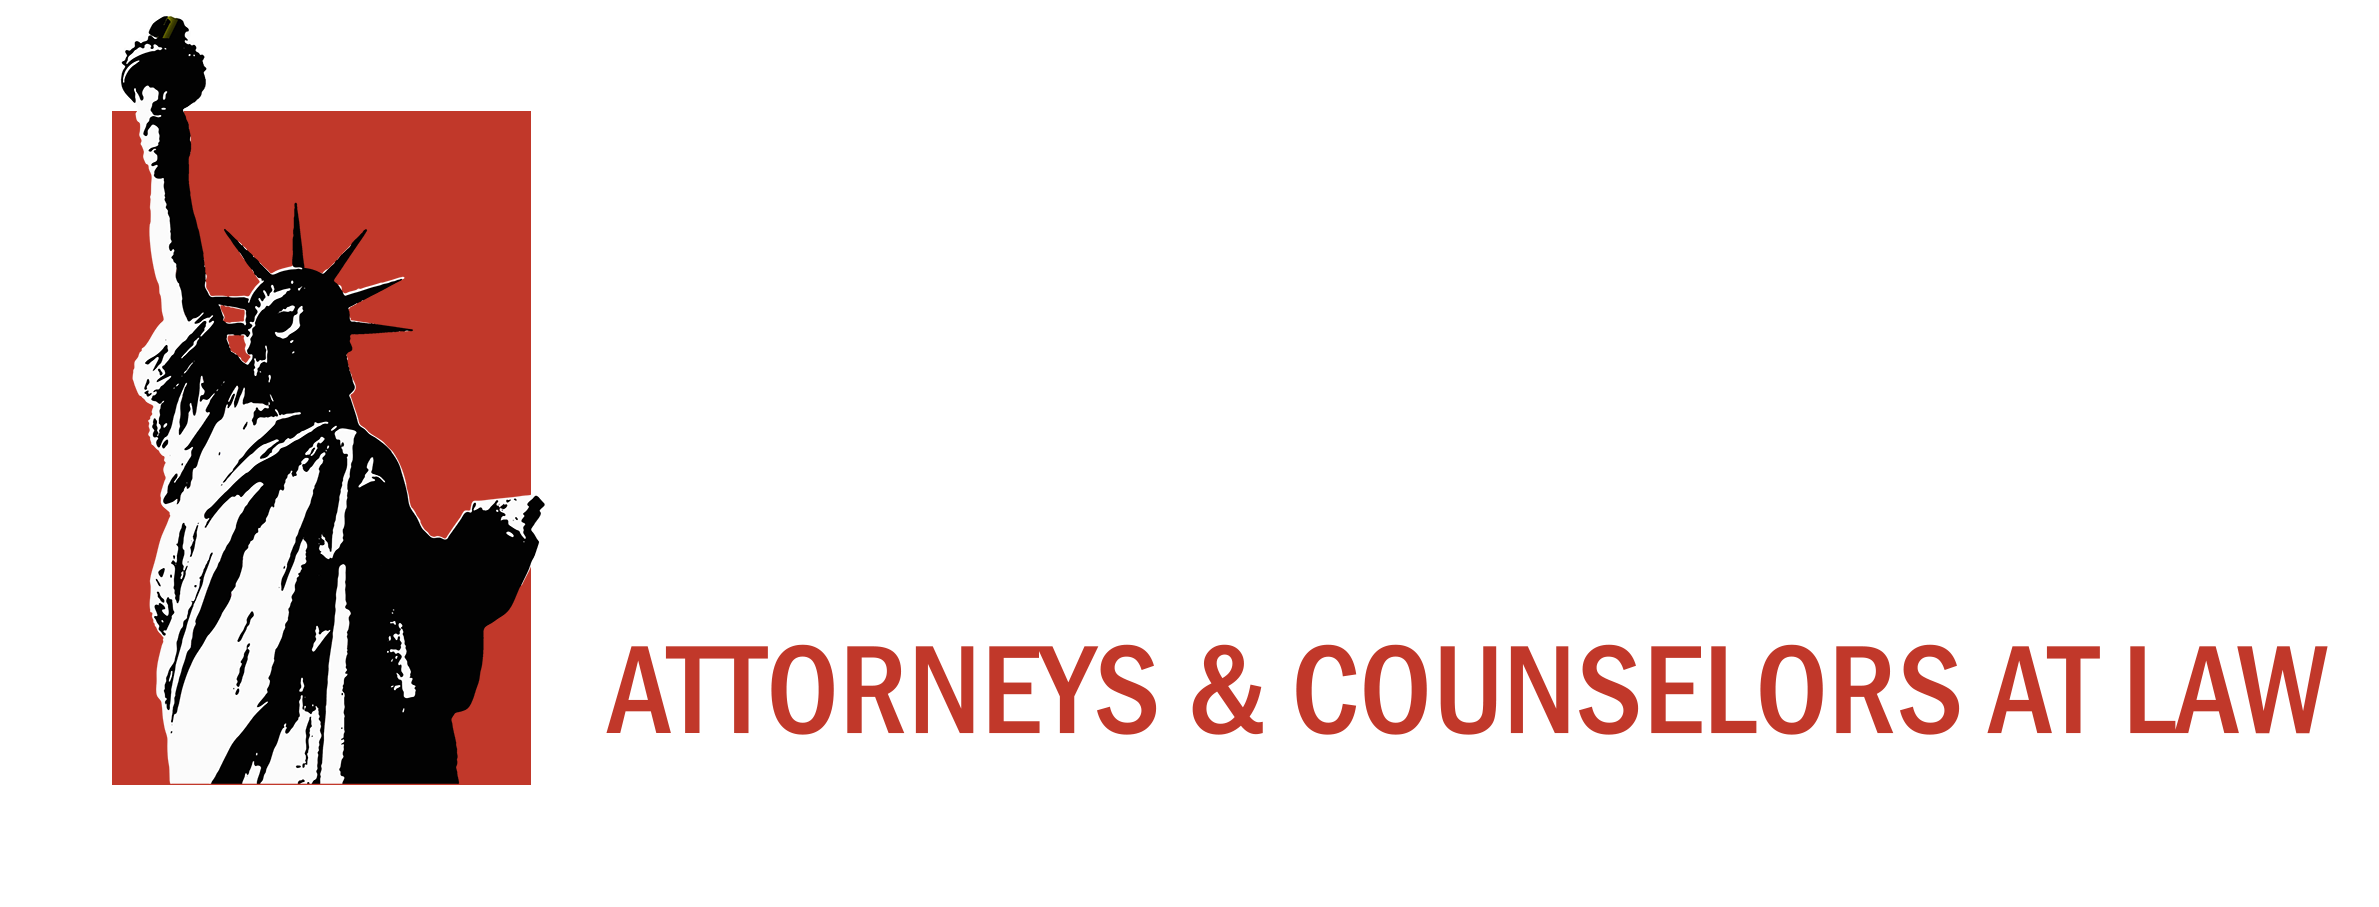 The Gbenjo Law Group